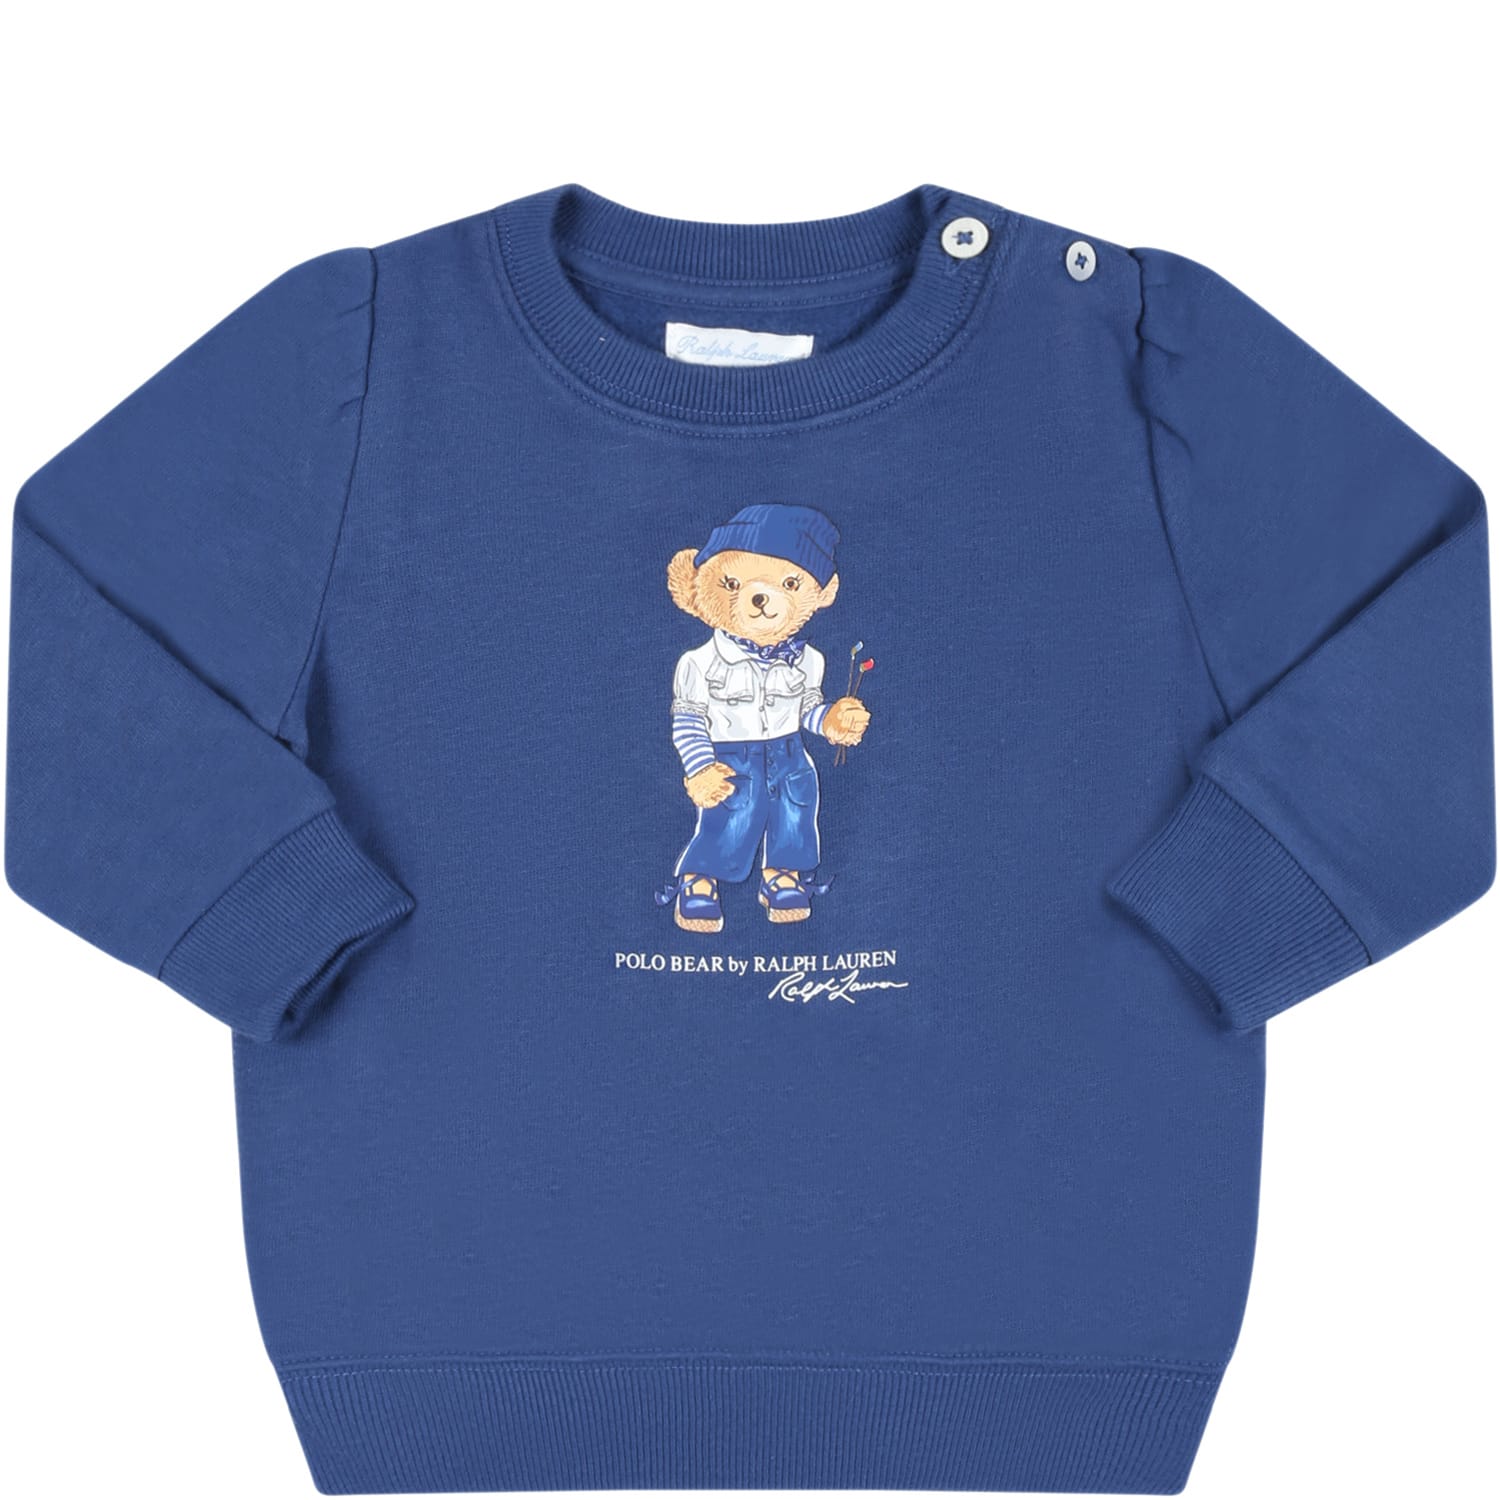 Ralph Lauren Blue Sweatshirt For Baby Girl With Polo Bear And White Logo